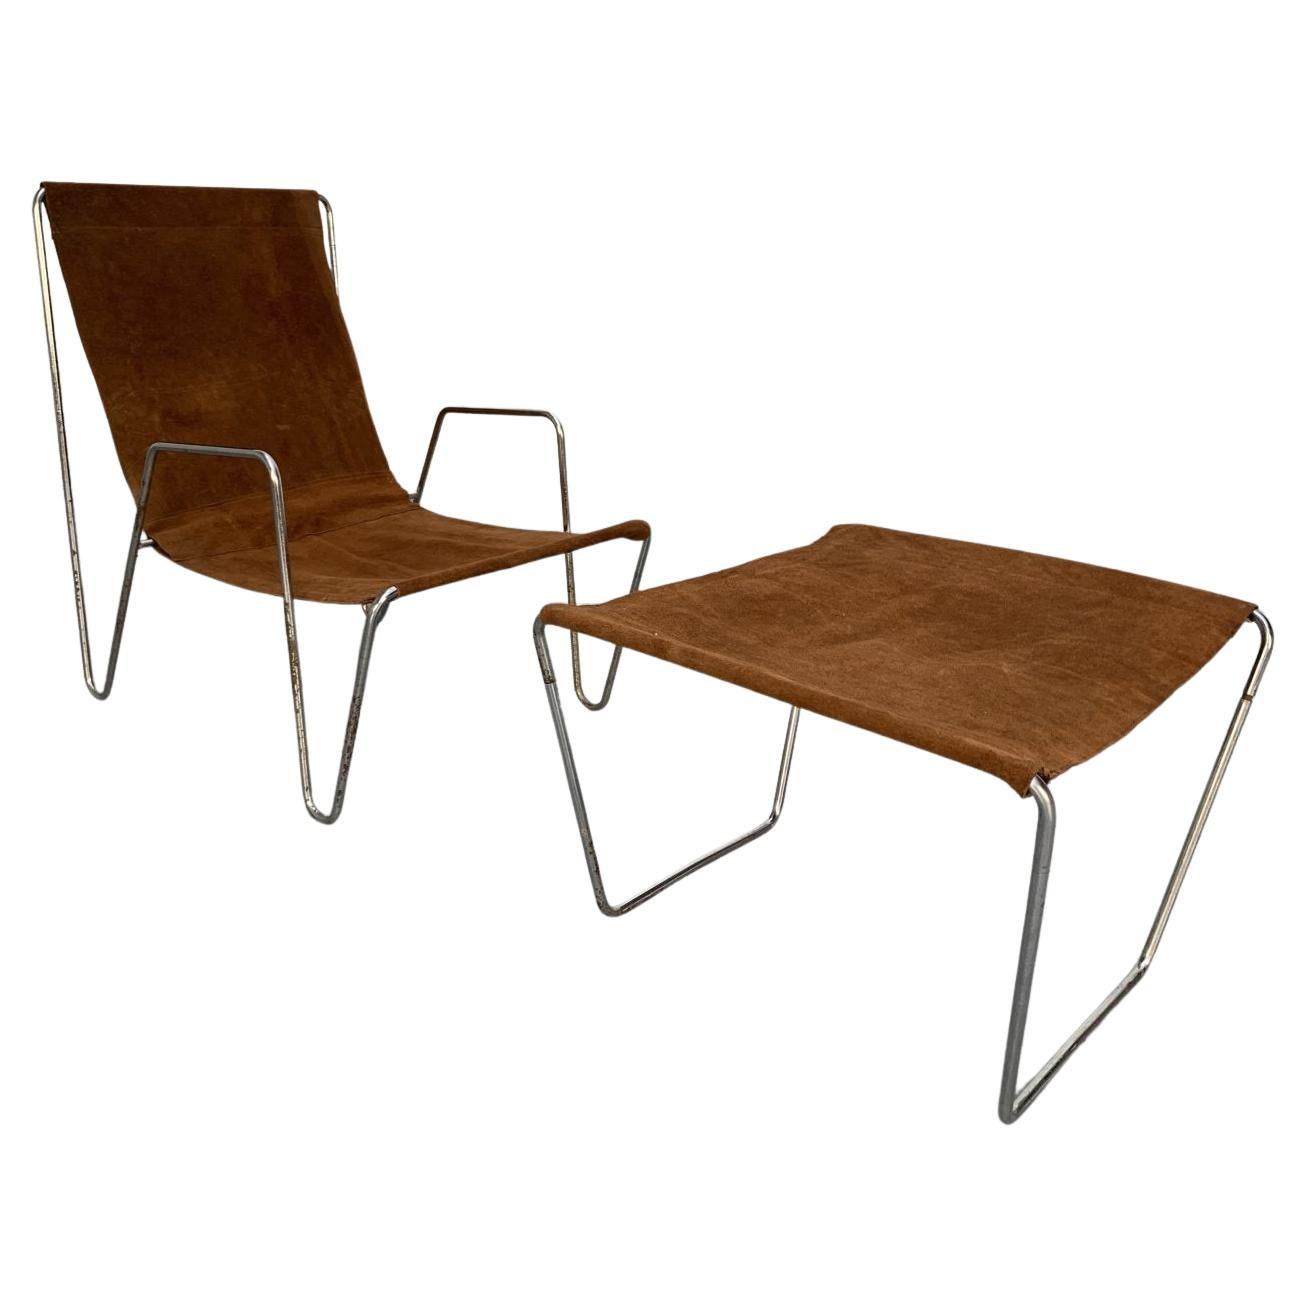 Rare Fritz Hansen “Bachelor” Lounge Chair & Footstool in Suede Leather & Chrome For Sale